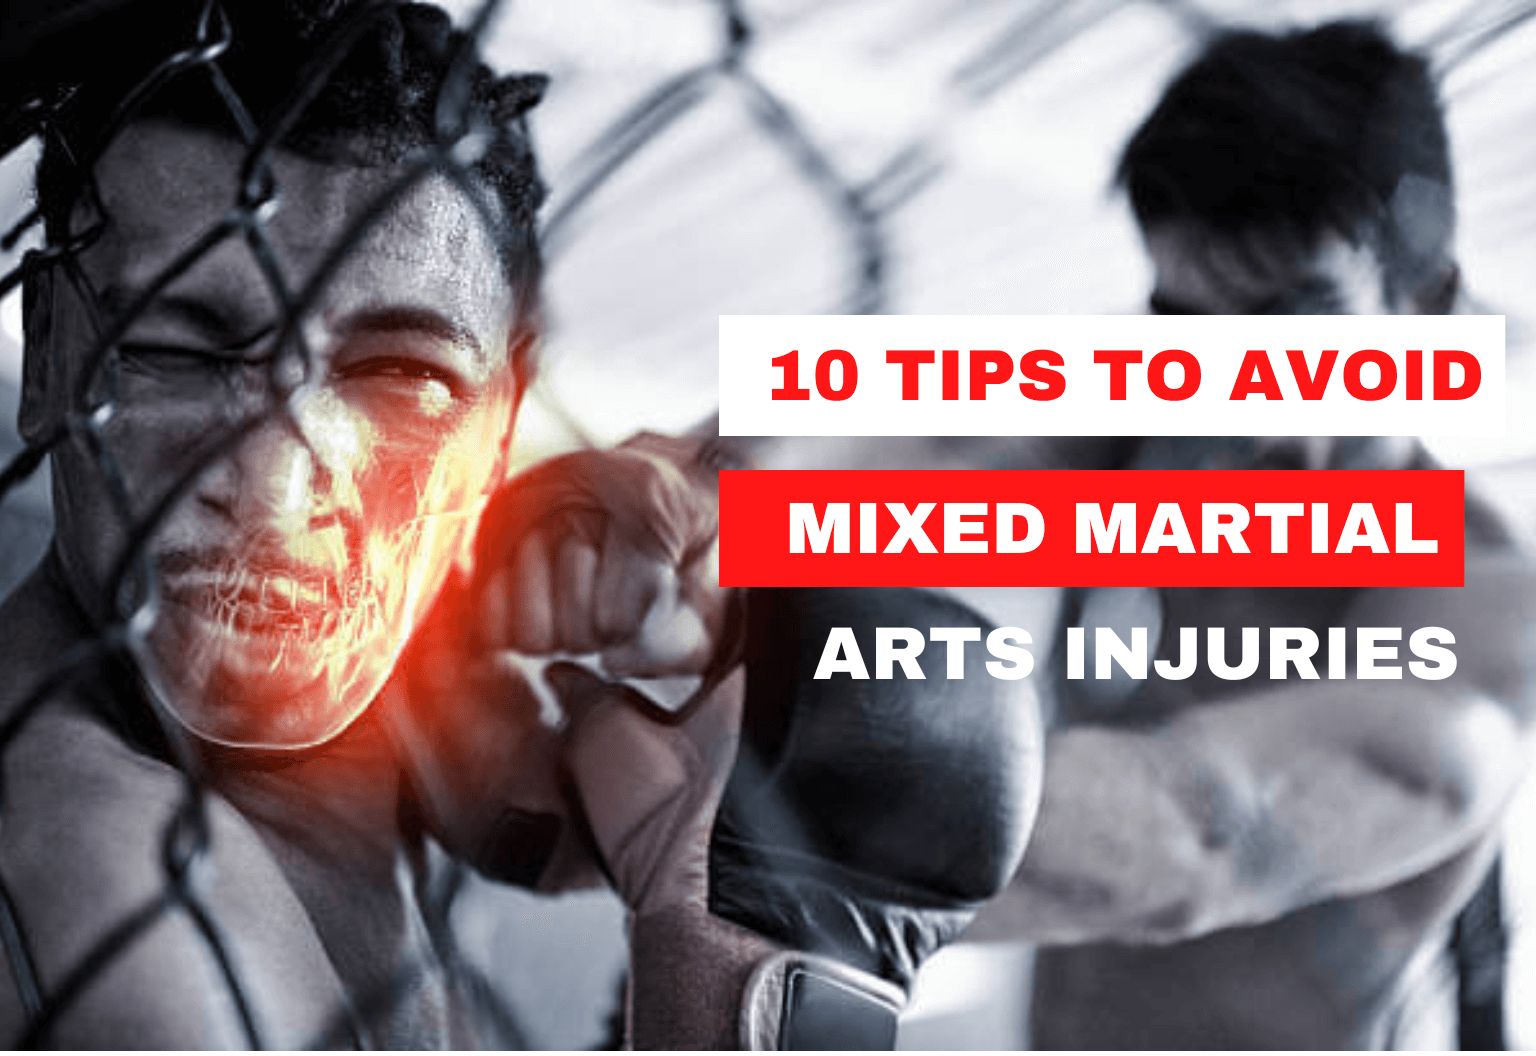 10 Tips To Avoid Mixed Martial Arts Injuries